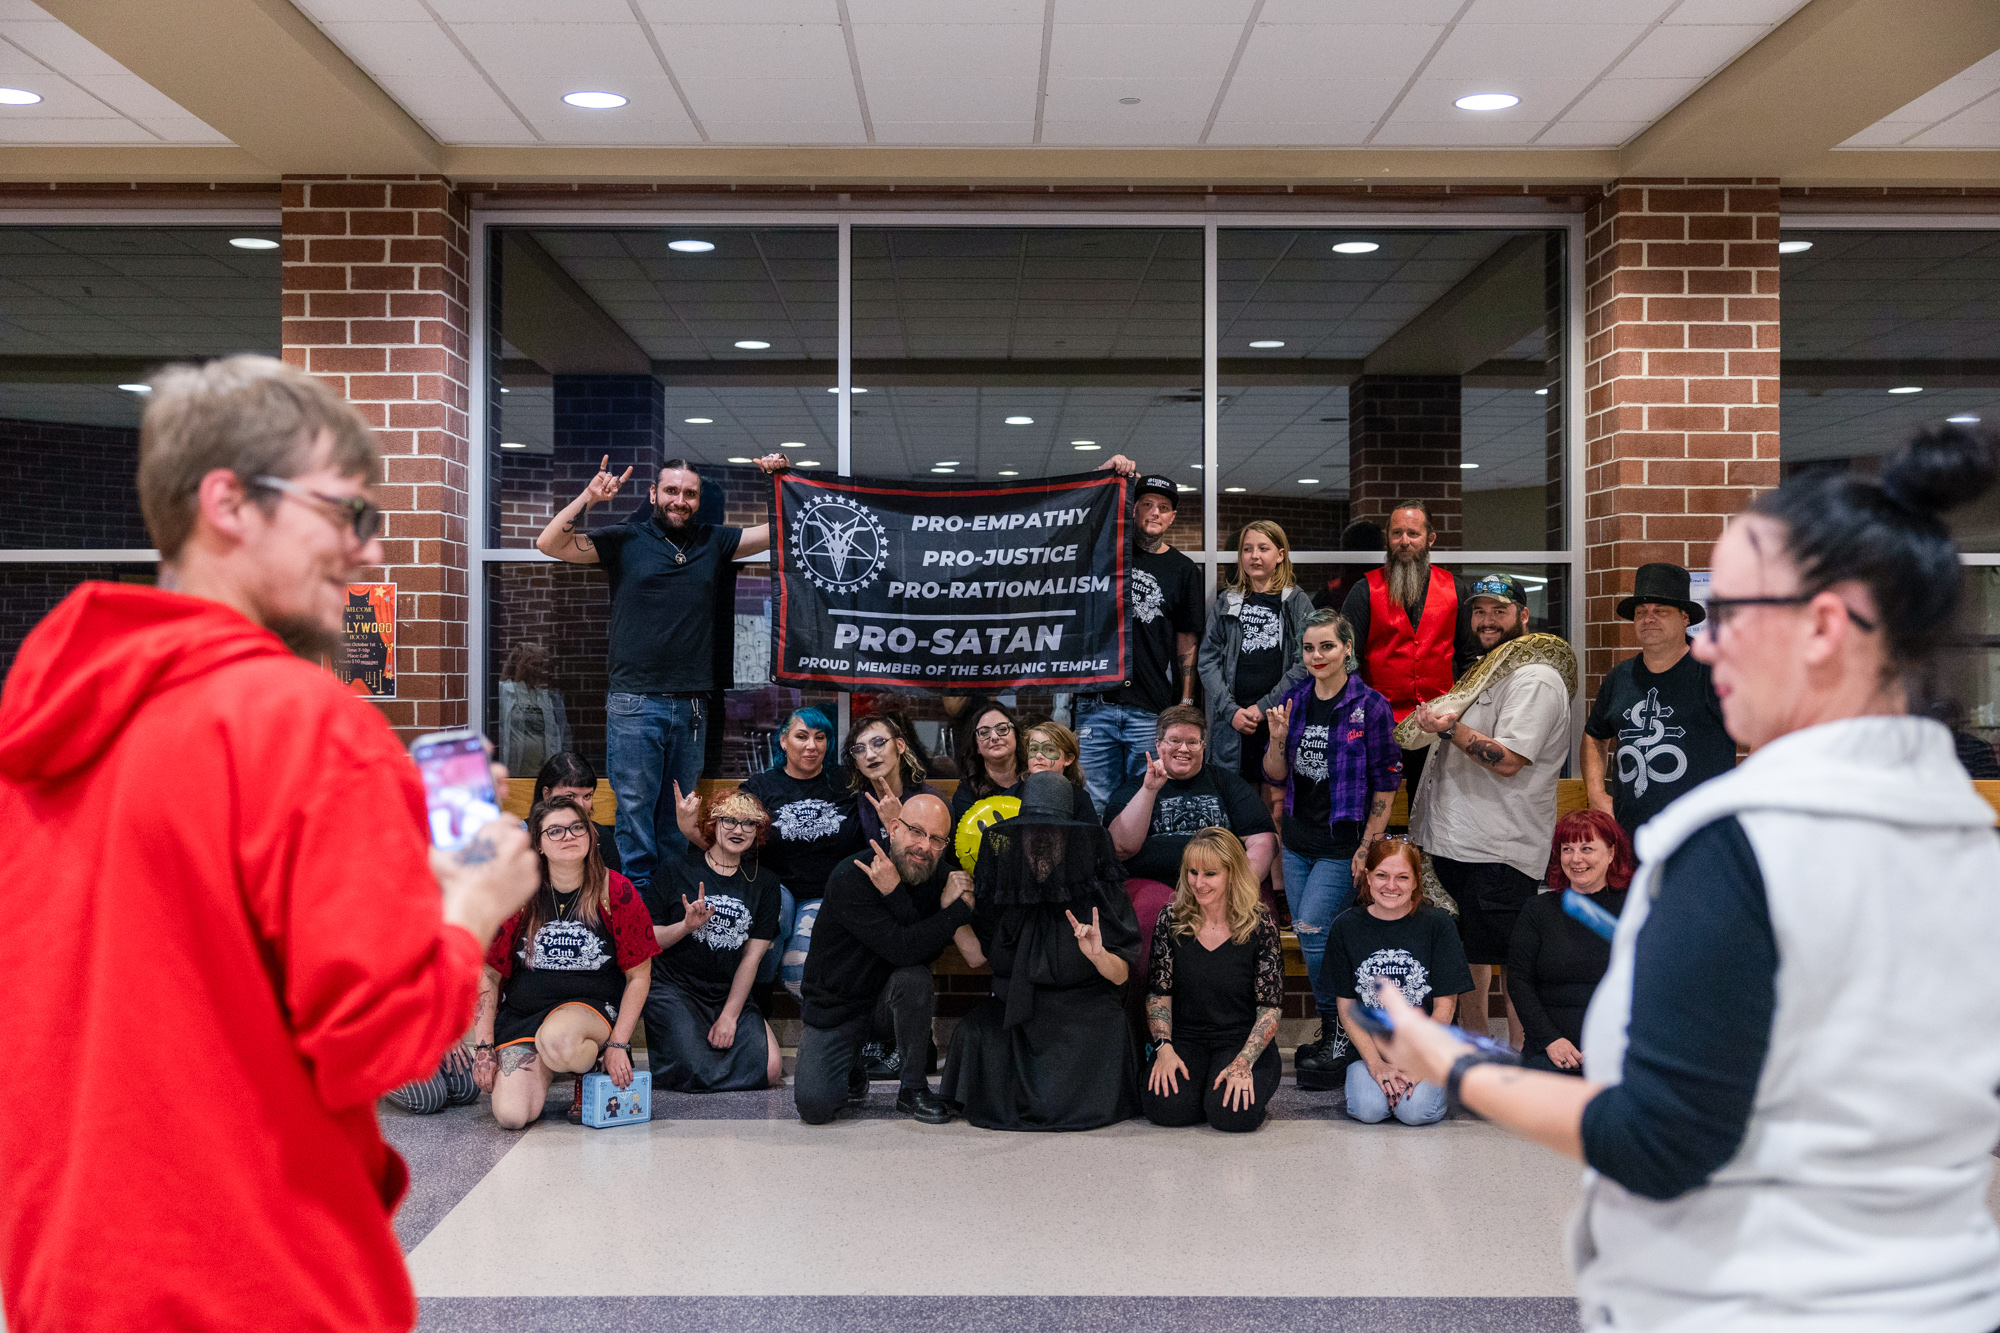 A group photo of kids, adults, and a snake with a banner reading 